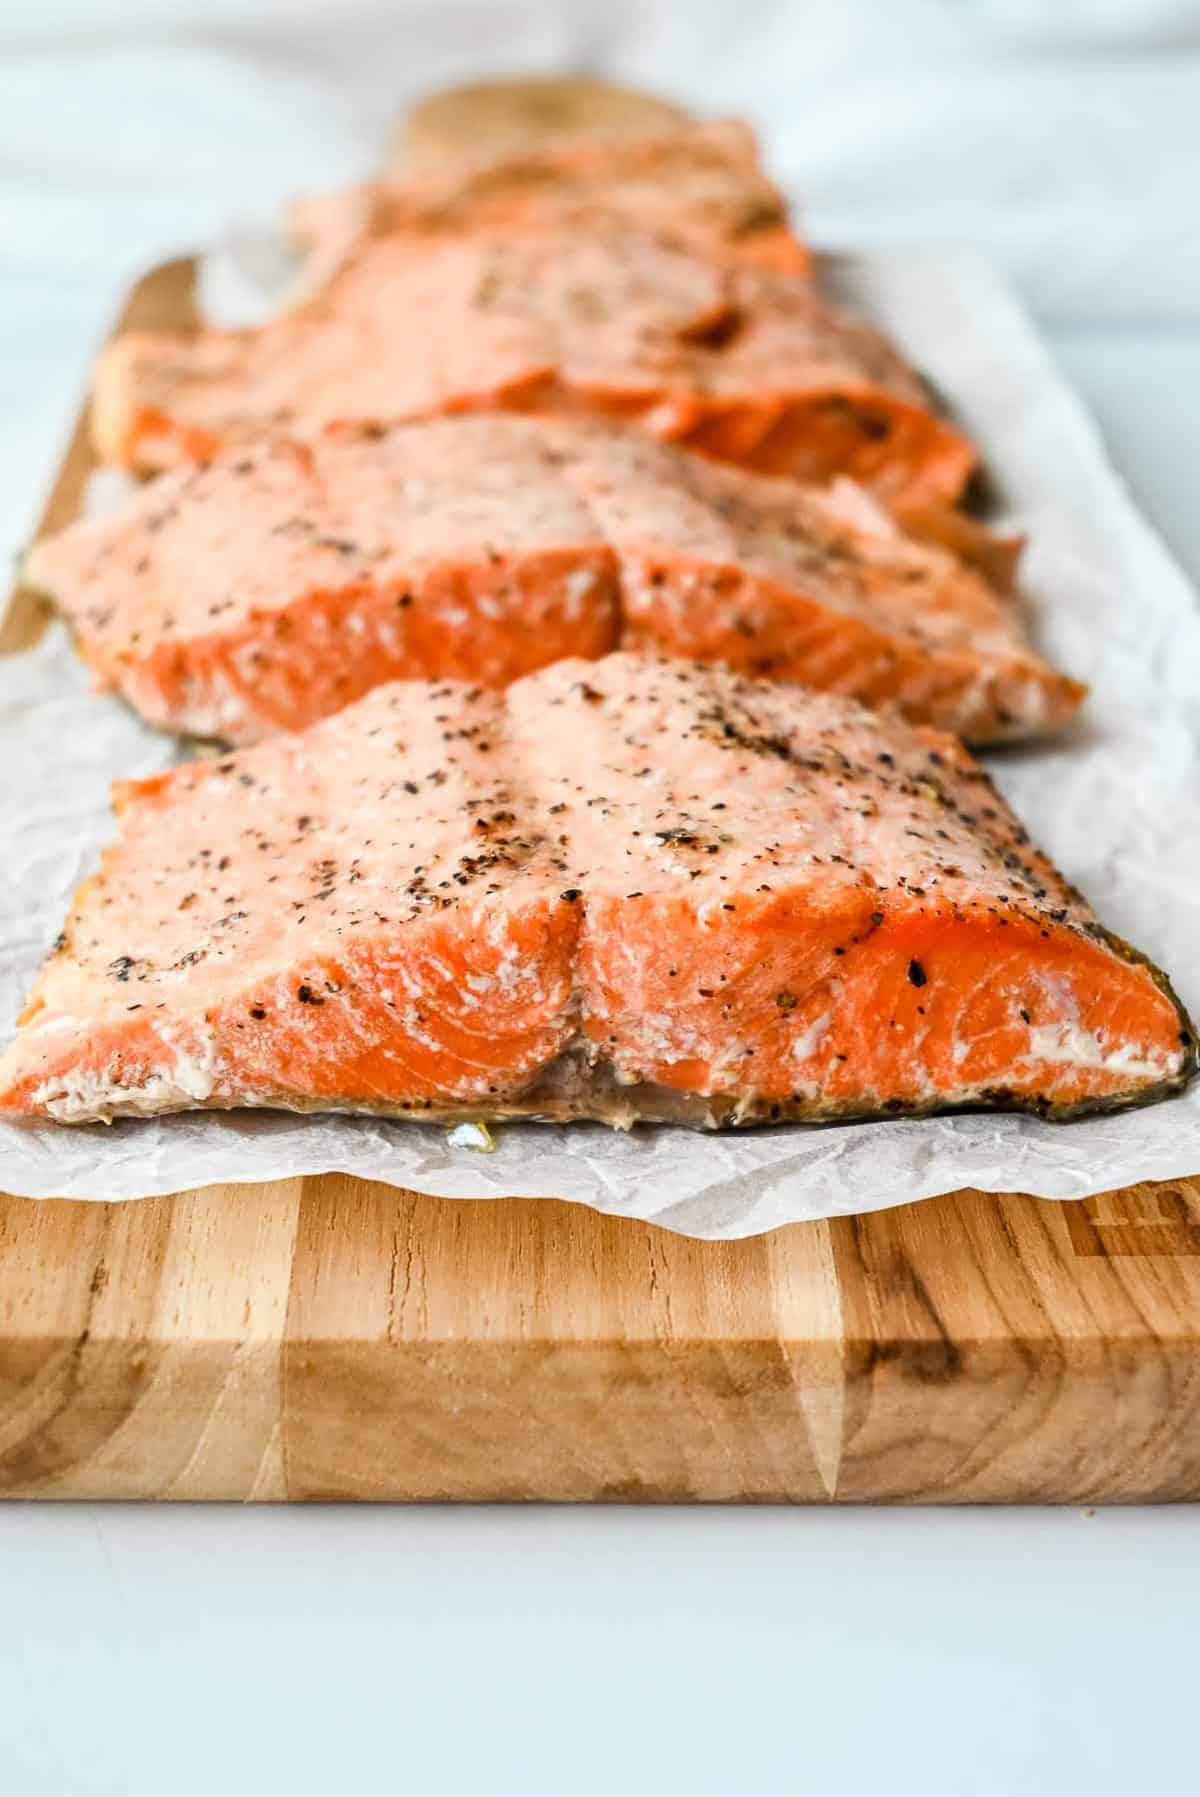 cooked air fryer salmon with skin on a wood slab